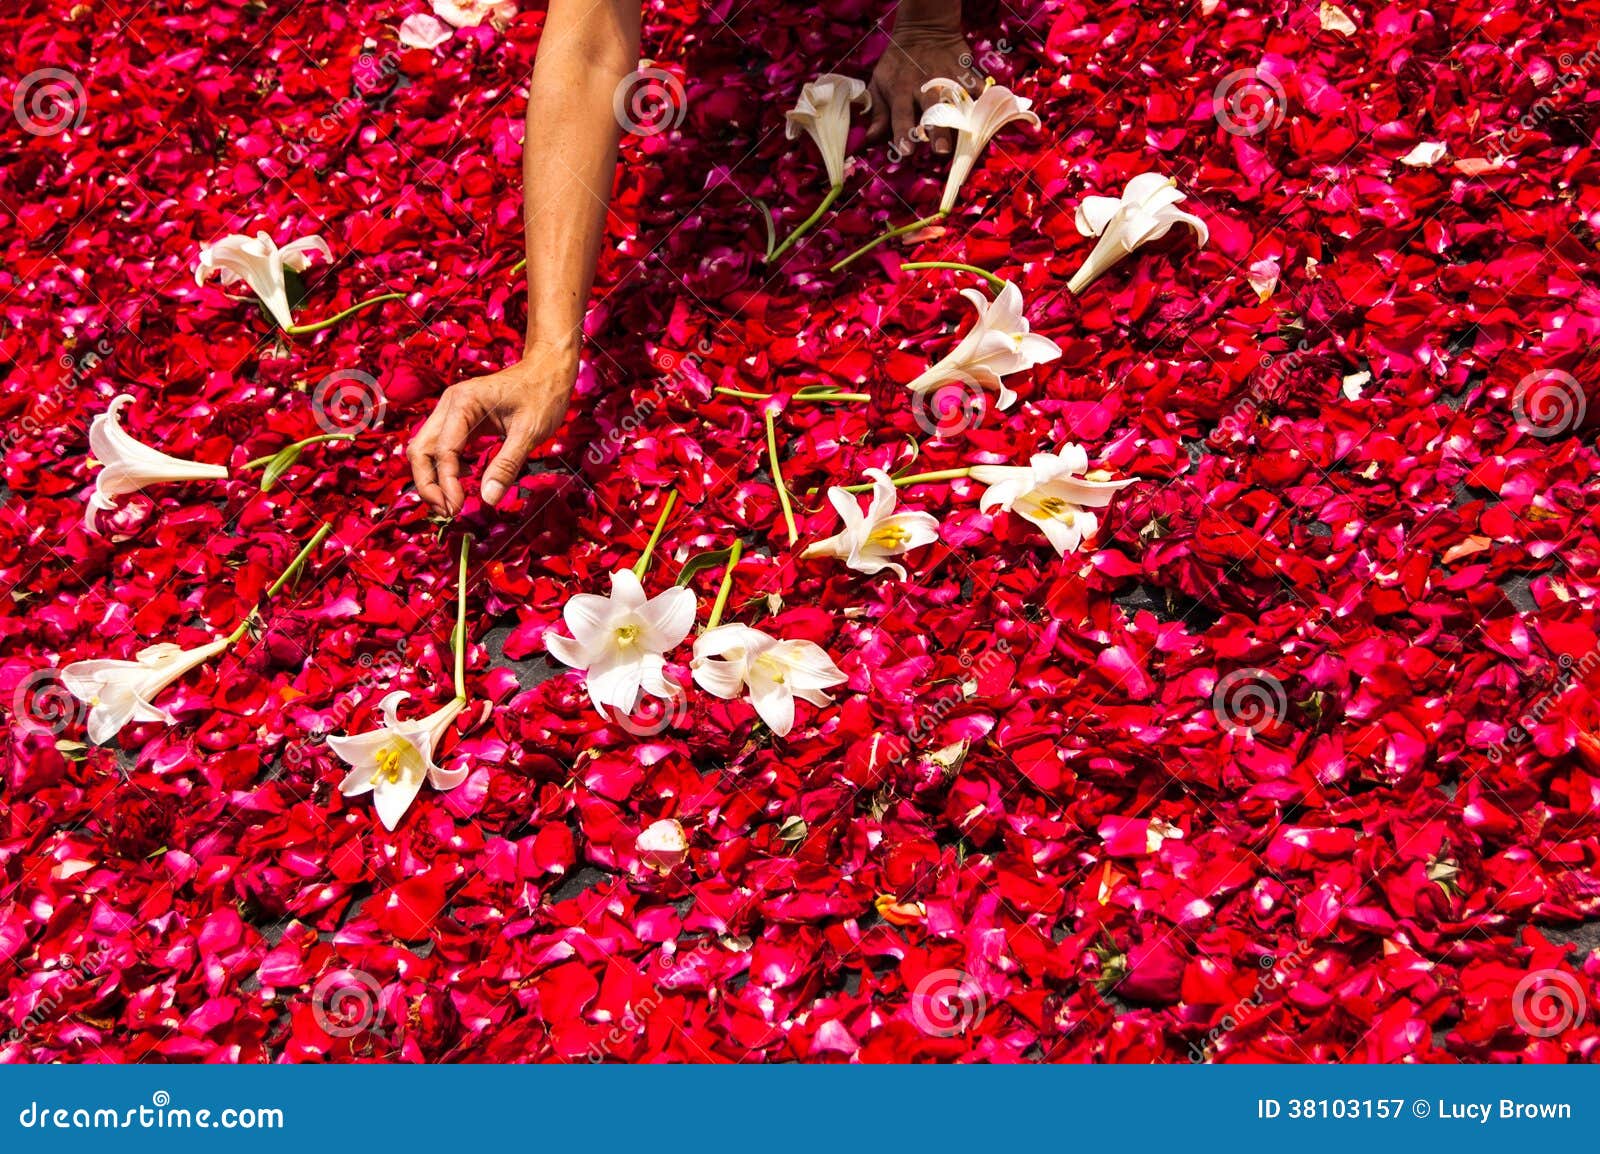 making a holy week processional carpet of rose petals